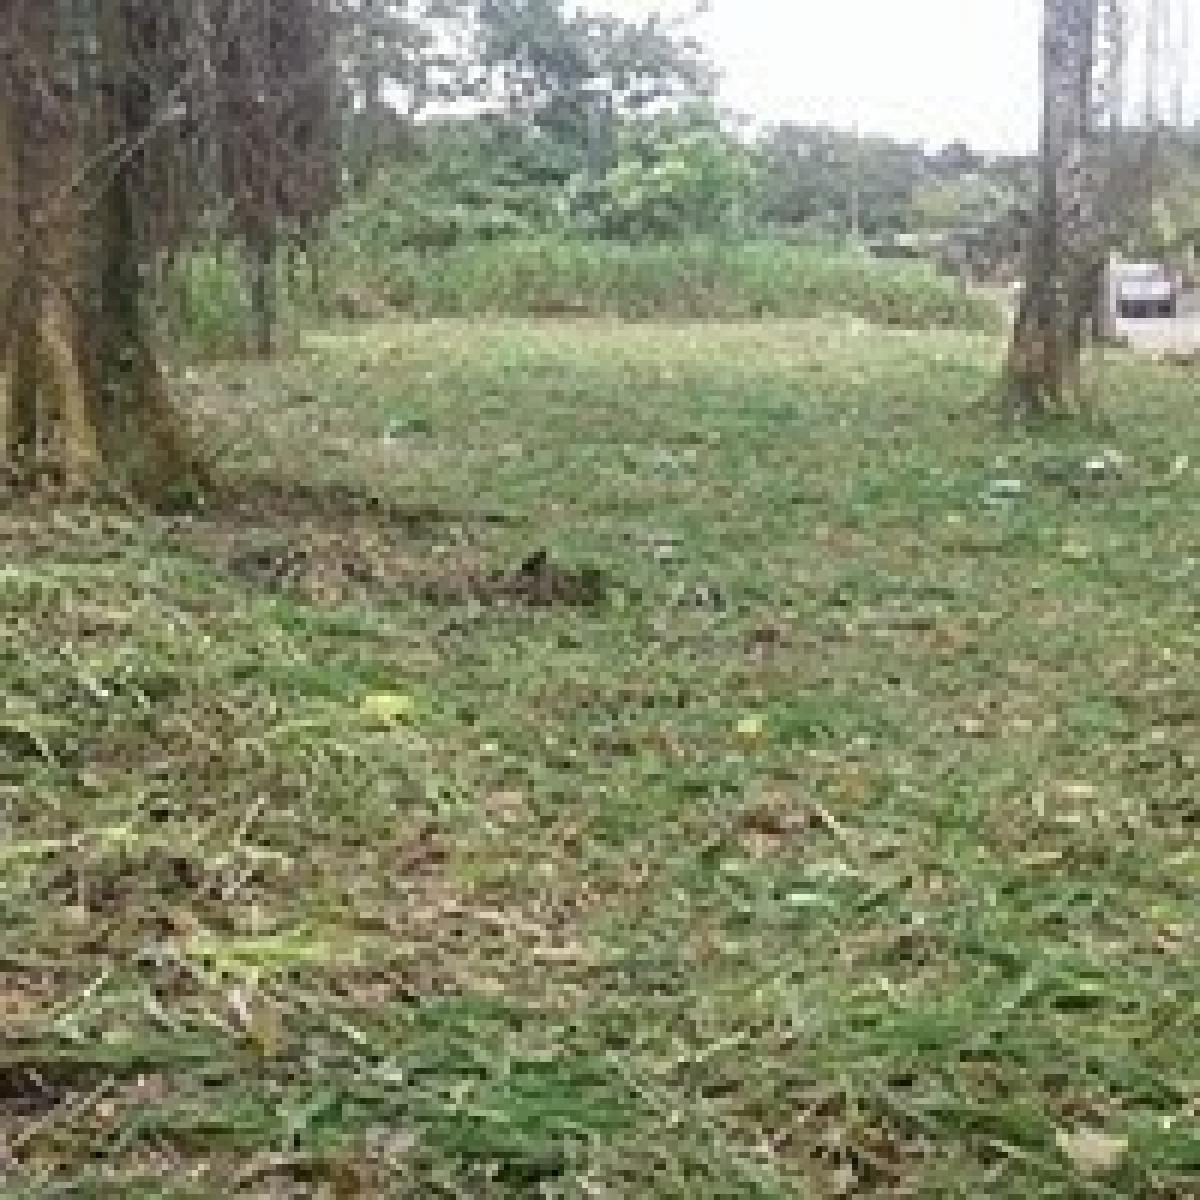 Picture of Residential Land For Sale in Pococi, Limon, Costa Rica